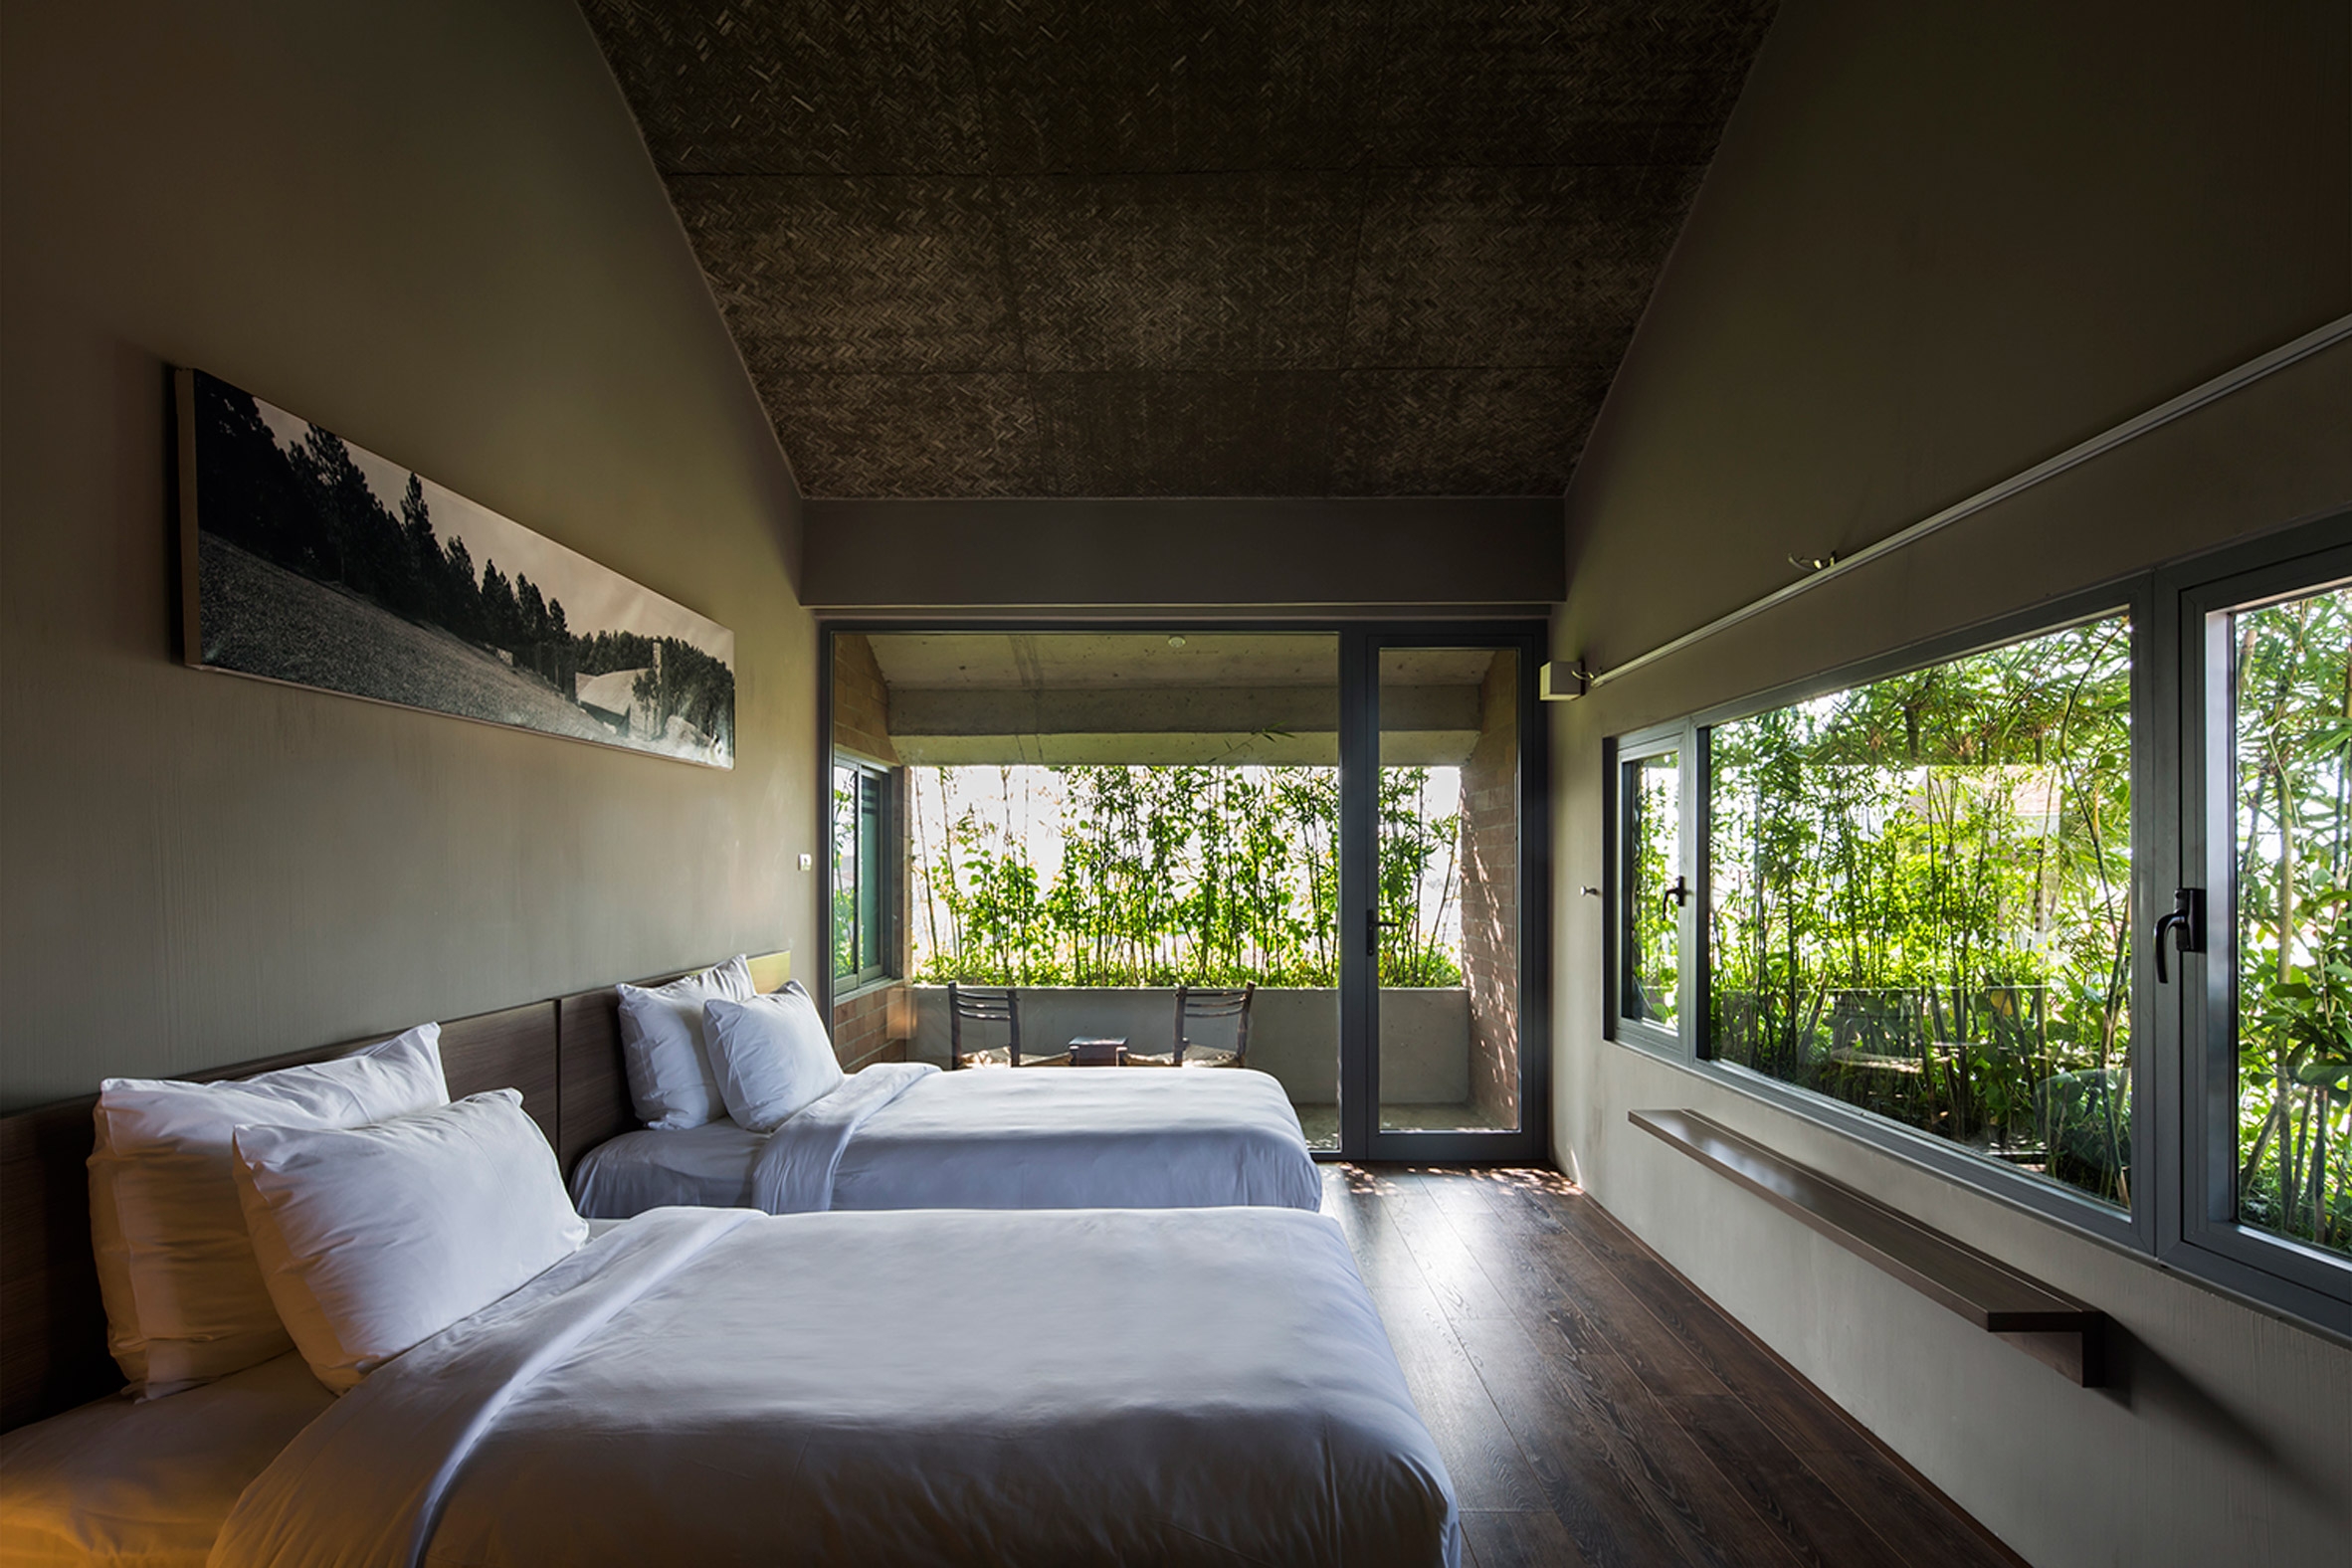 Atlas Hoi An Hotel by Vo Trong Nhgia